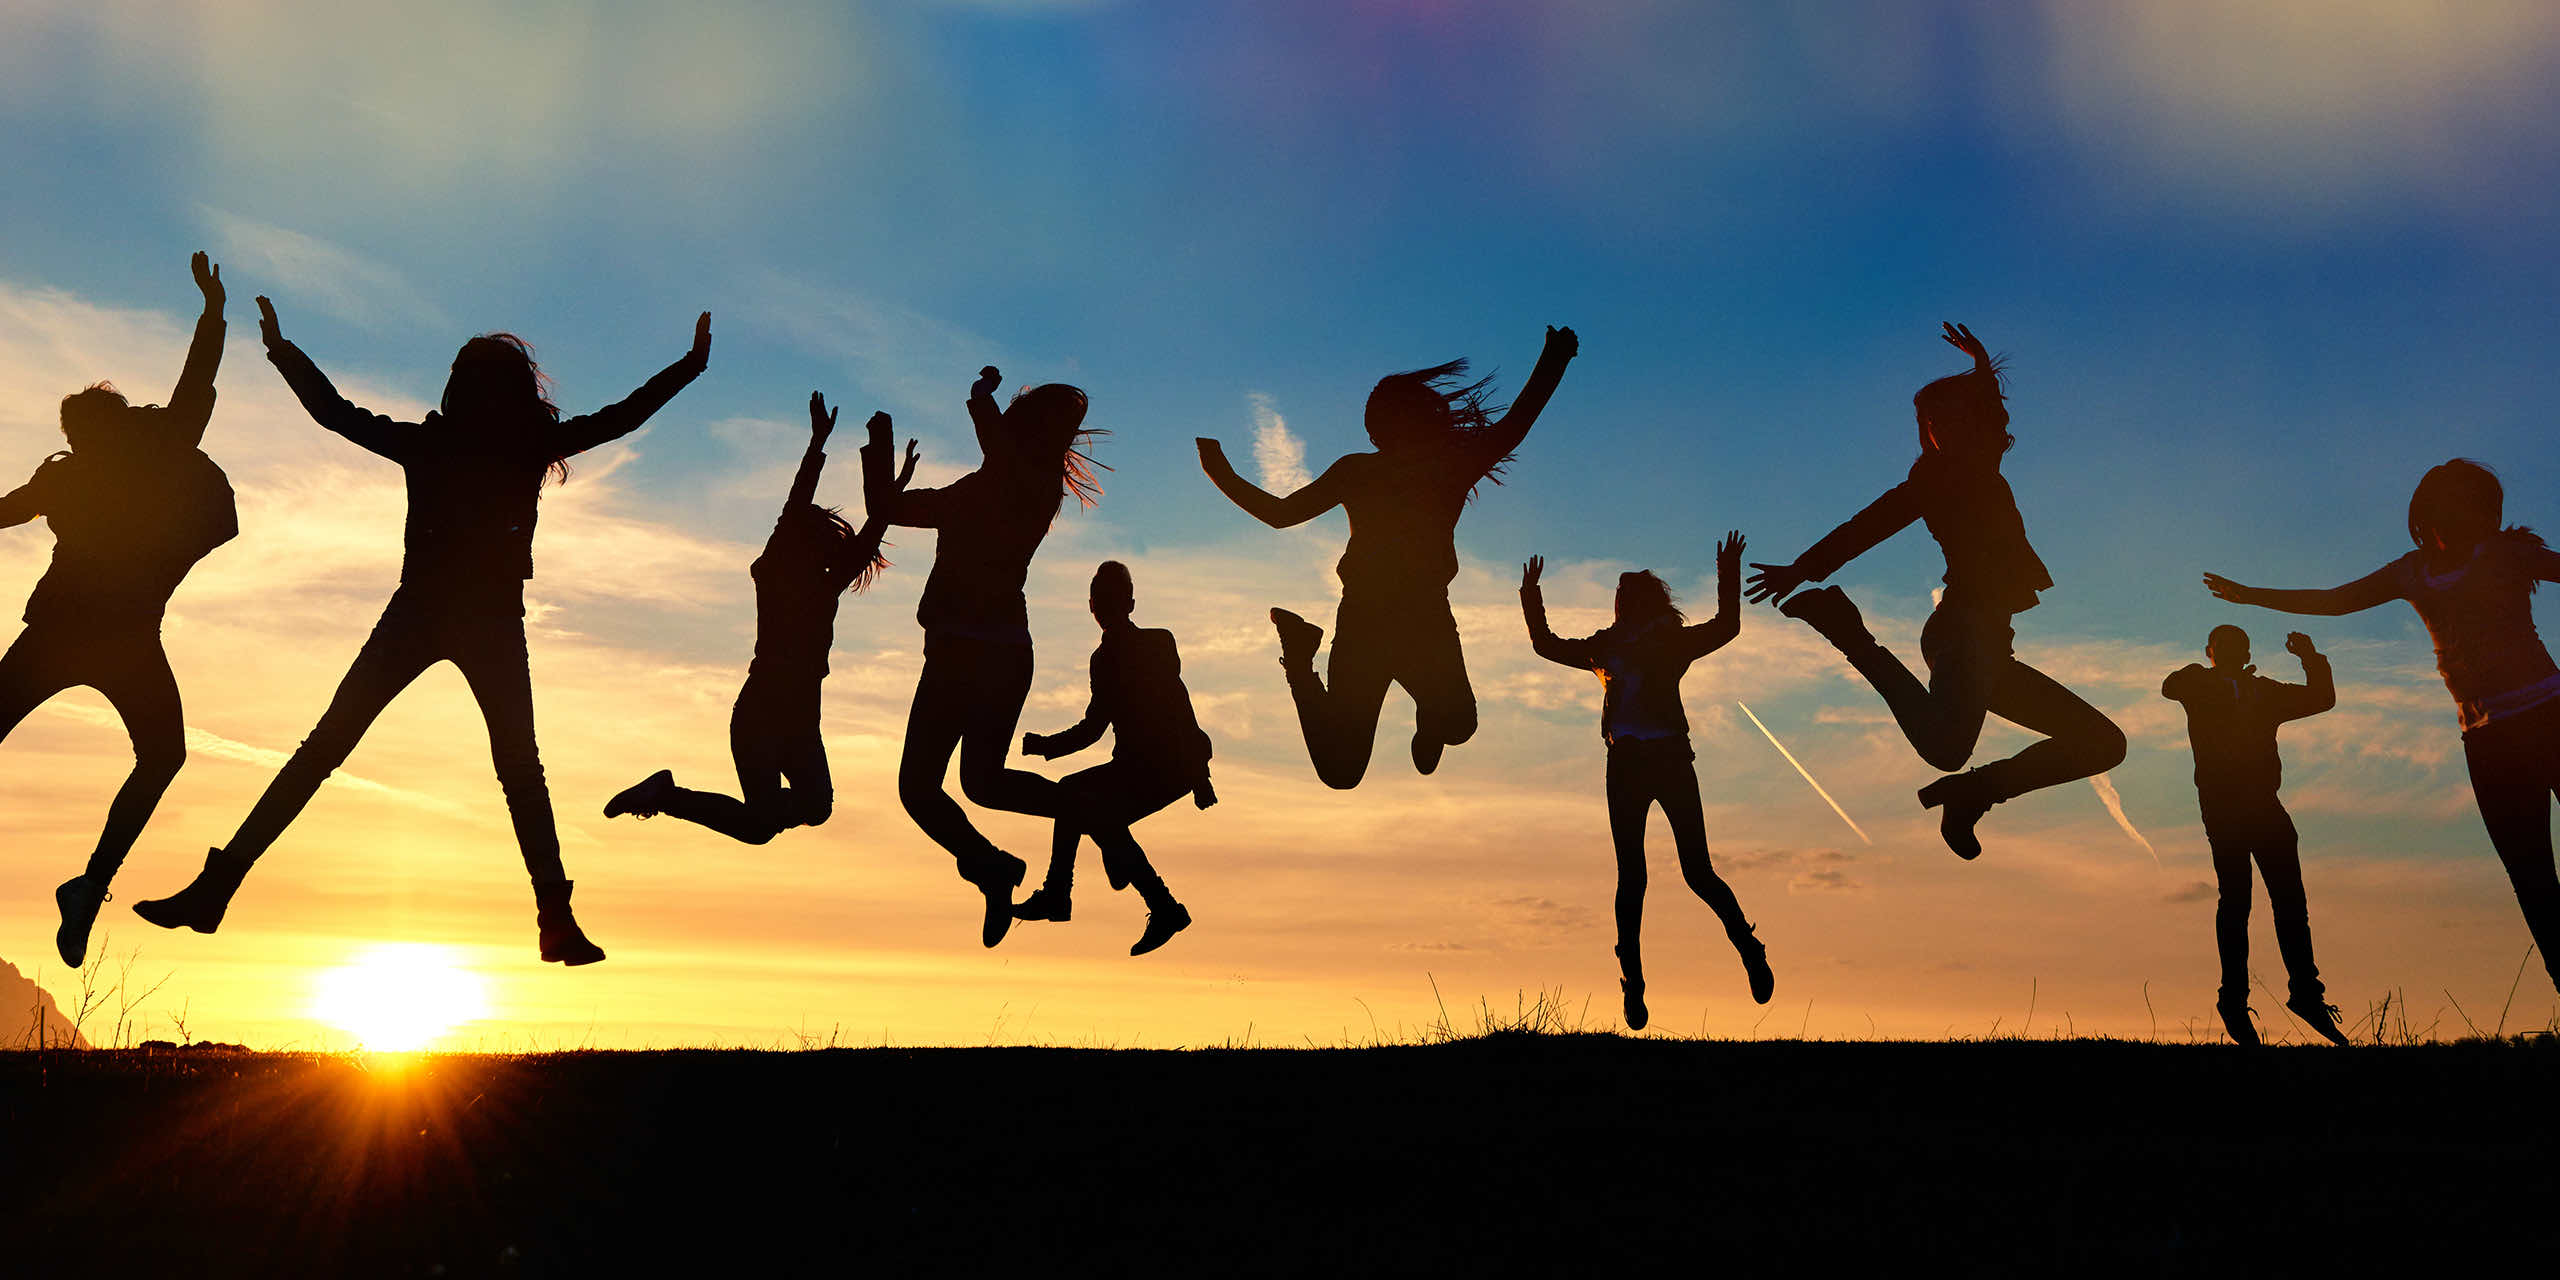 Group of people silhouetted jumping at sunset